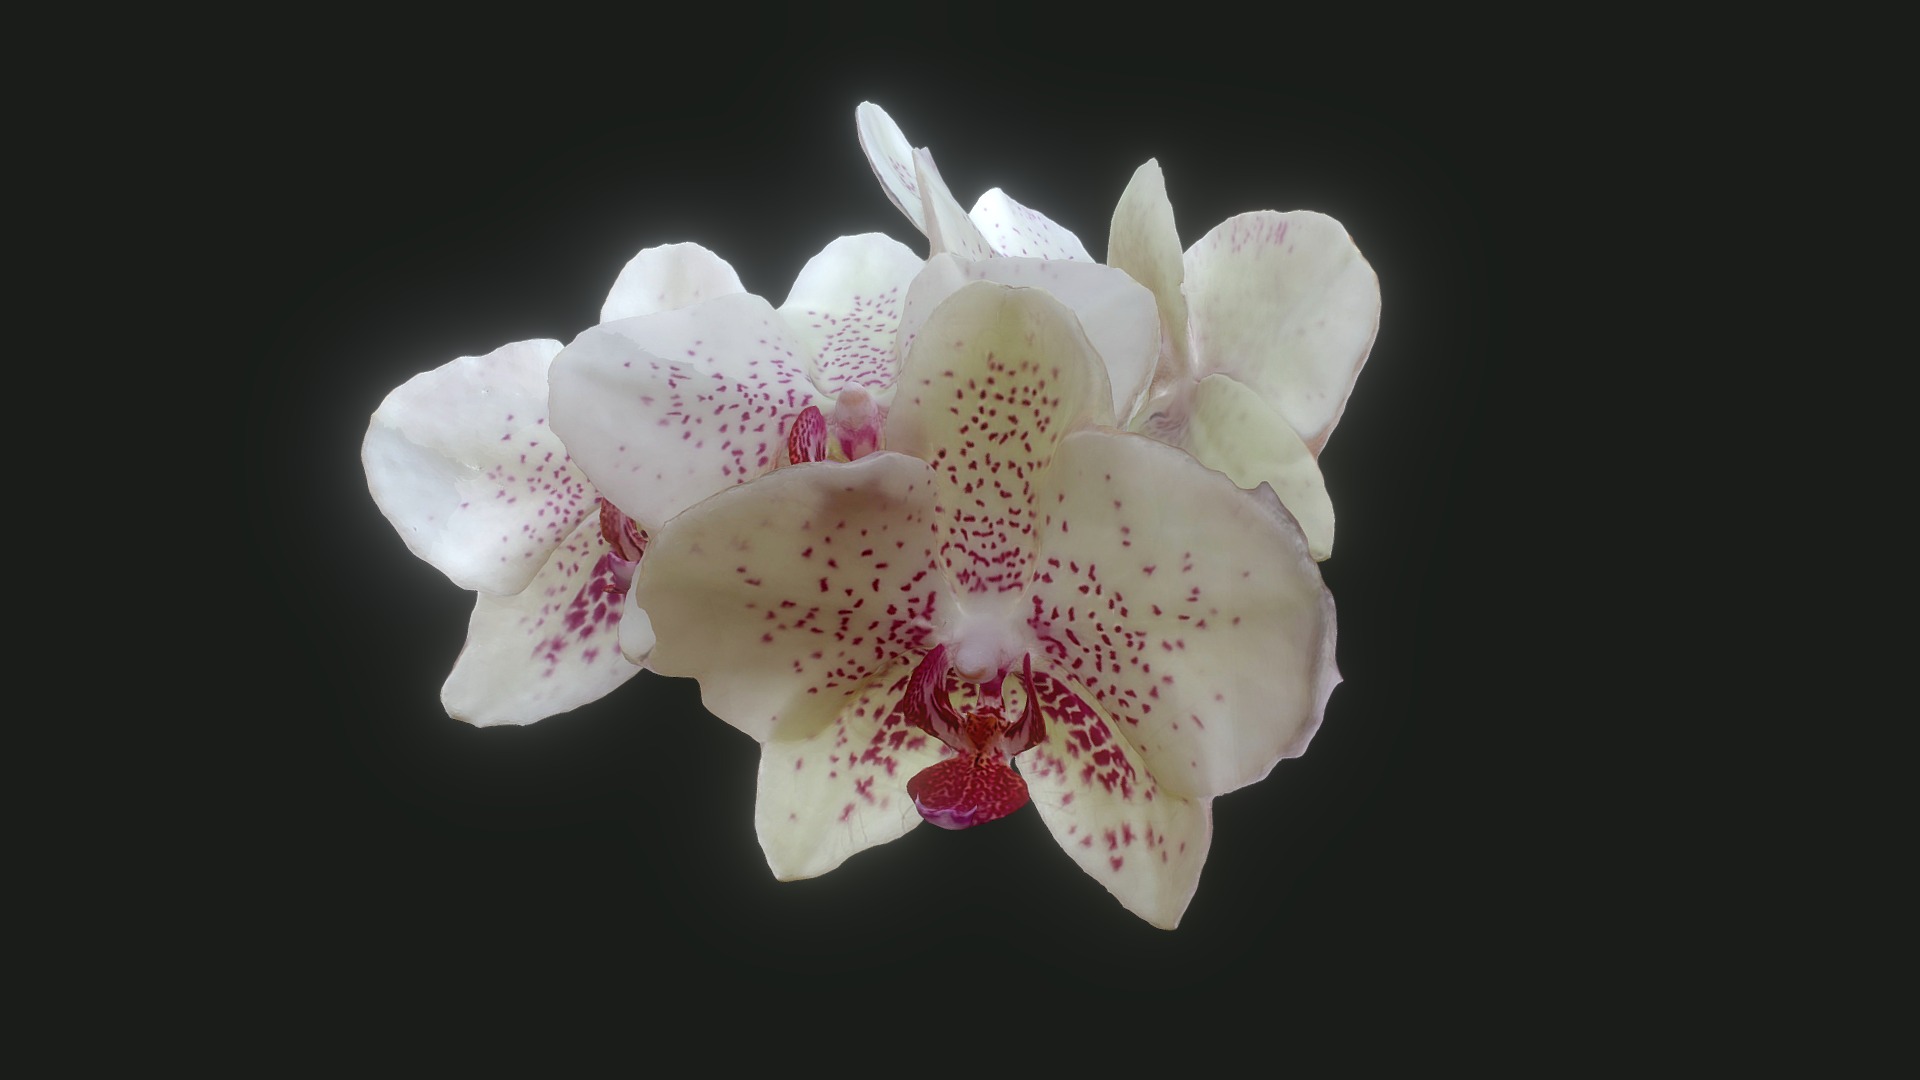 3D model Phalaenopsis Orchid - This is a 3D model of the Phalaenopsis Orchid. The 3D model is about a white flower with pink petals.